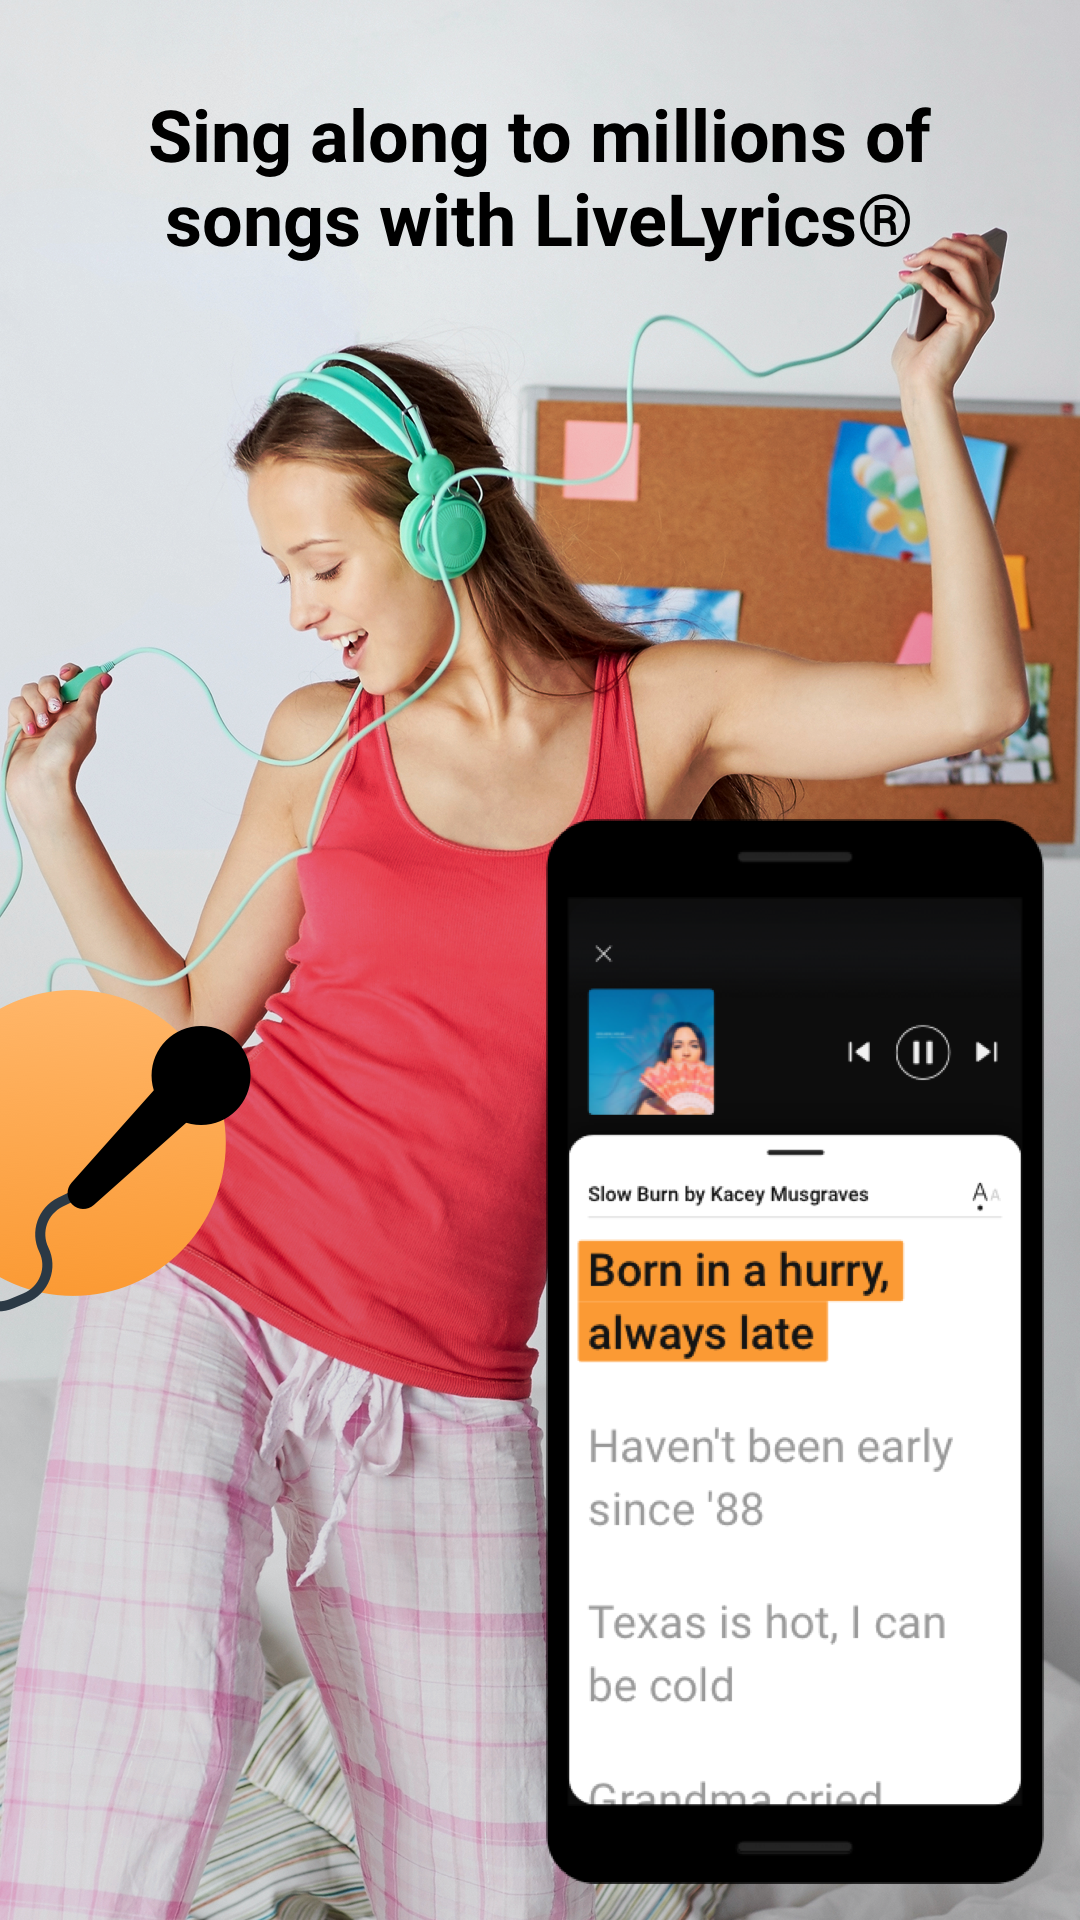 Android application SoundHound - Music Discovery & Lyrics screenshort